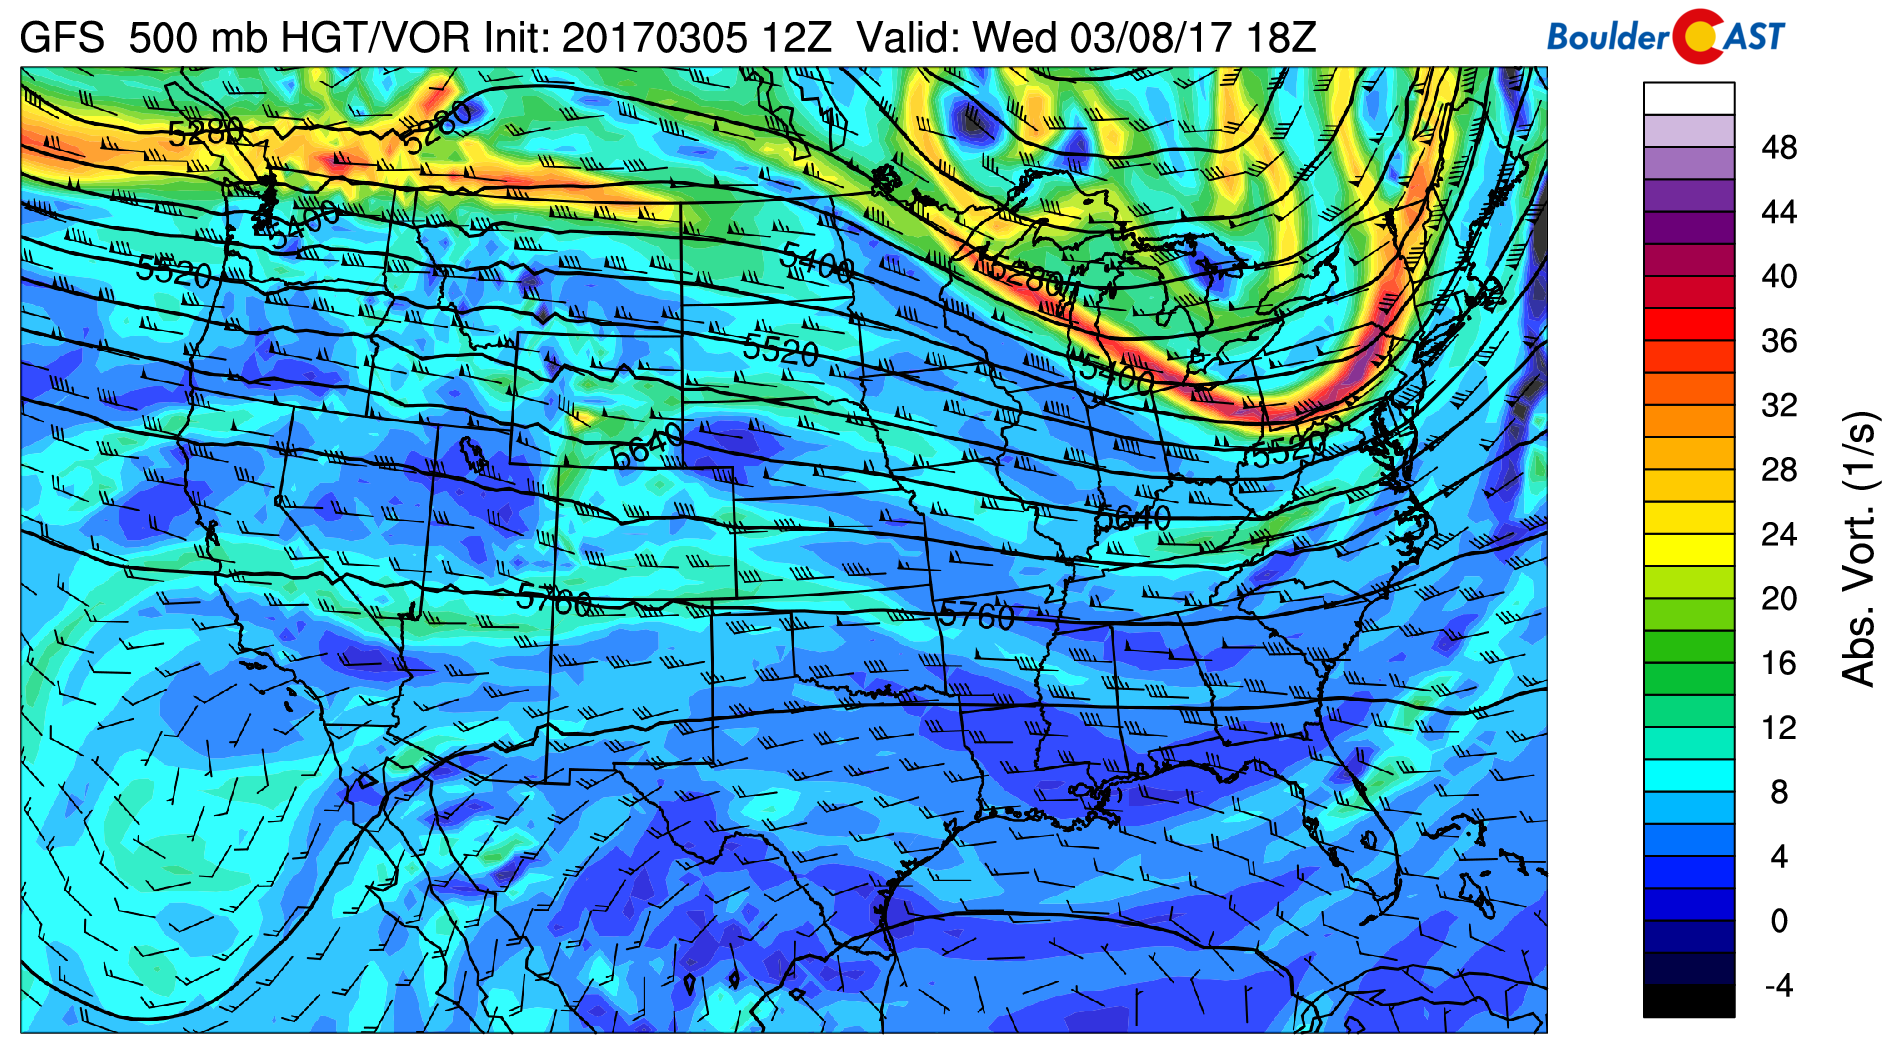 GFS 500 mb absolute vorticity for Wednesday